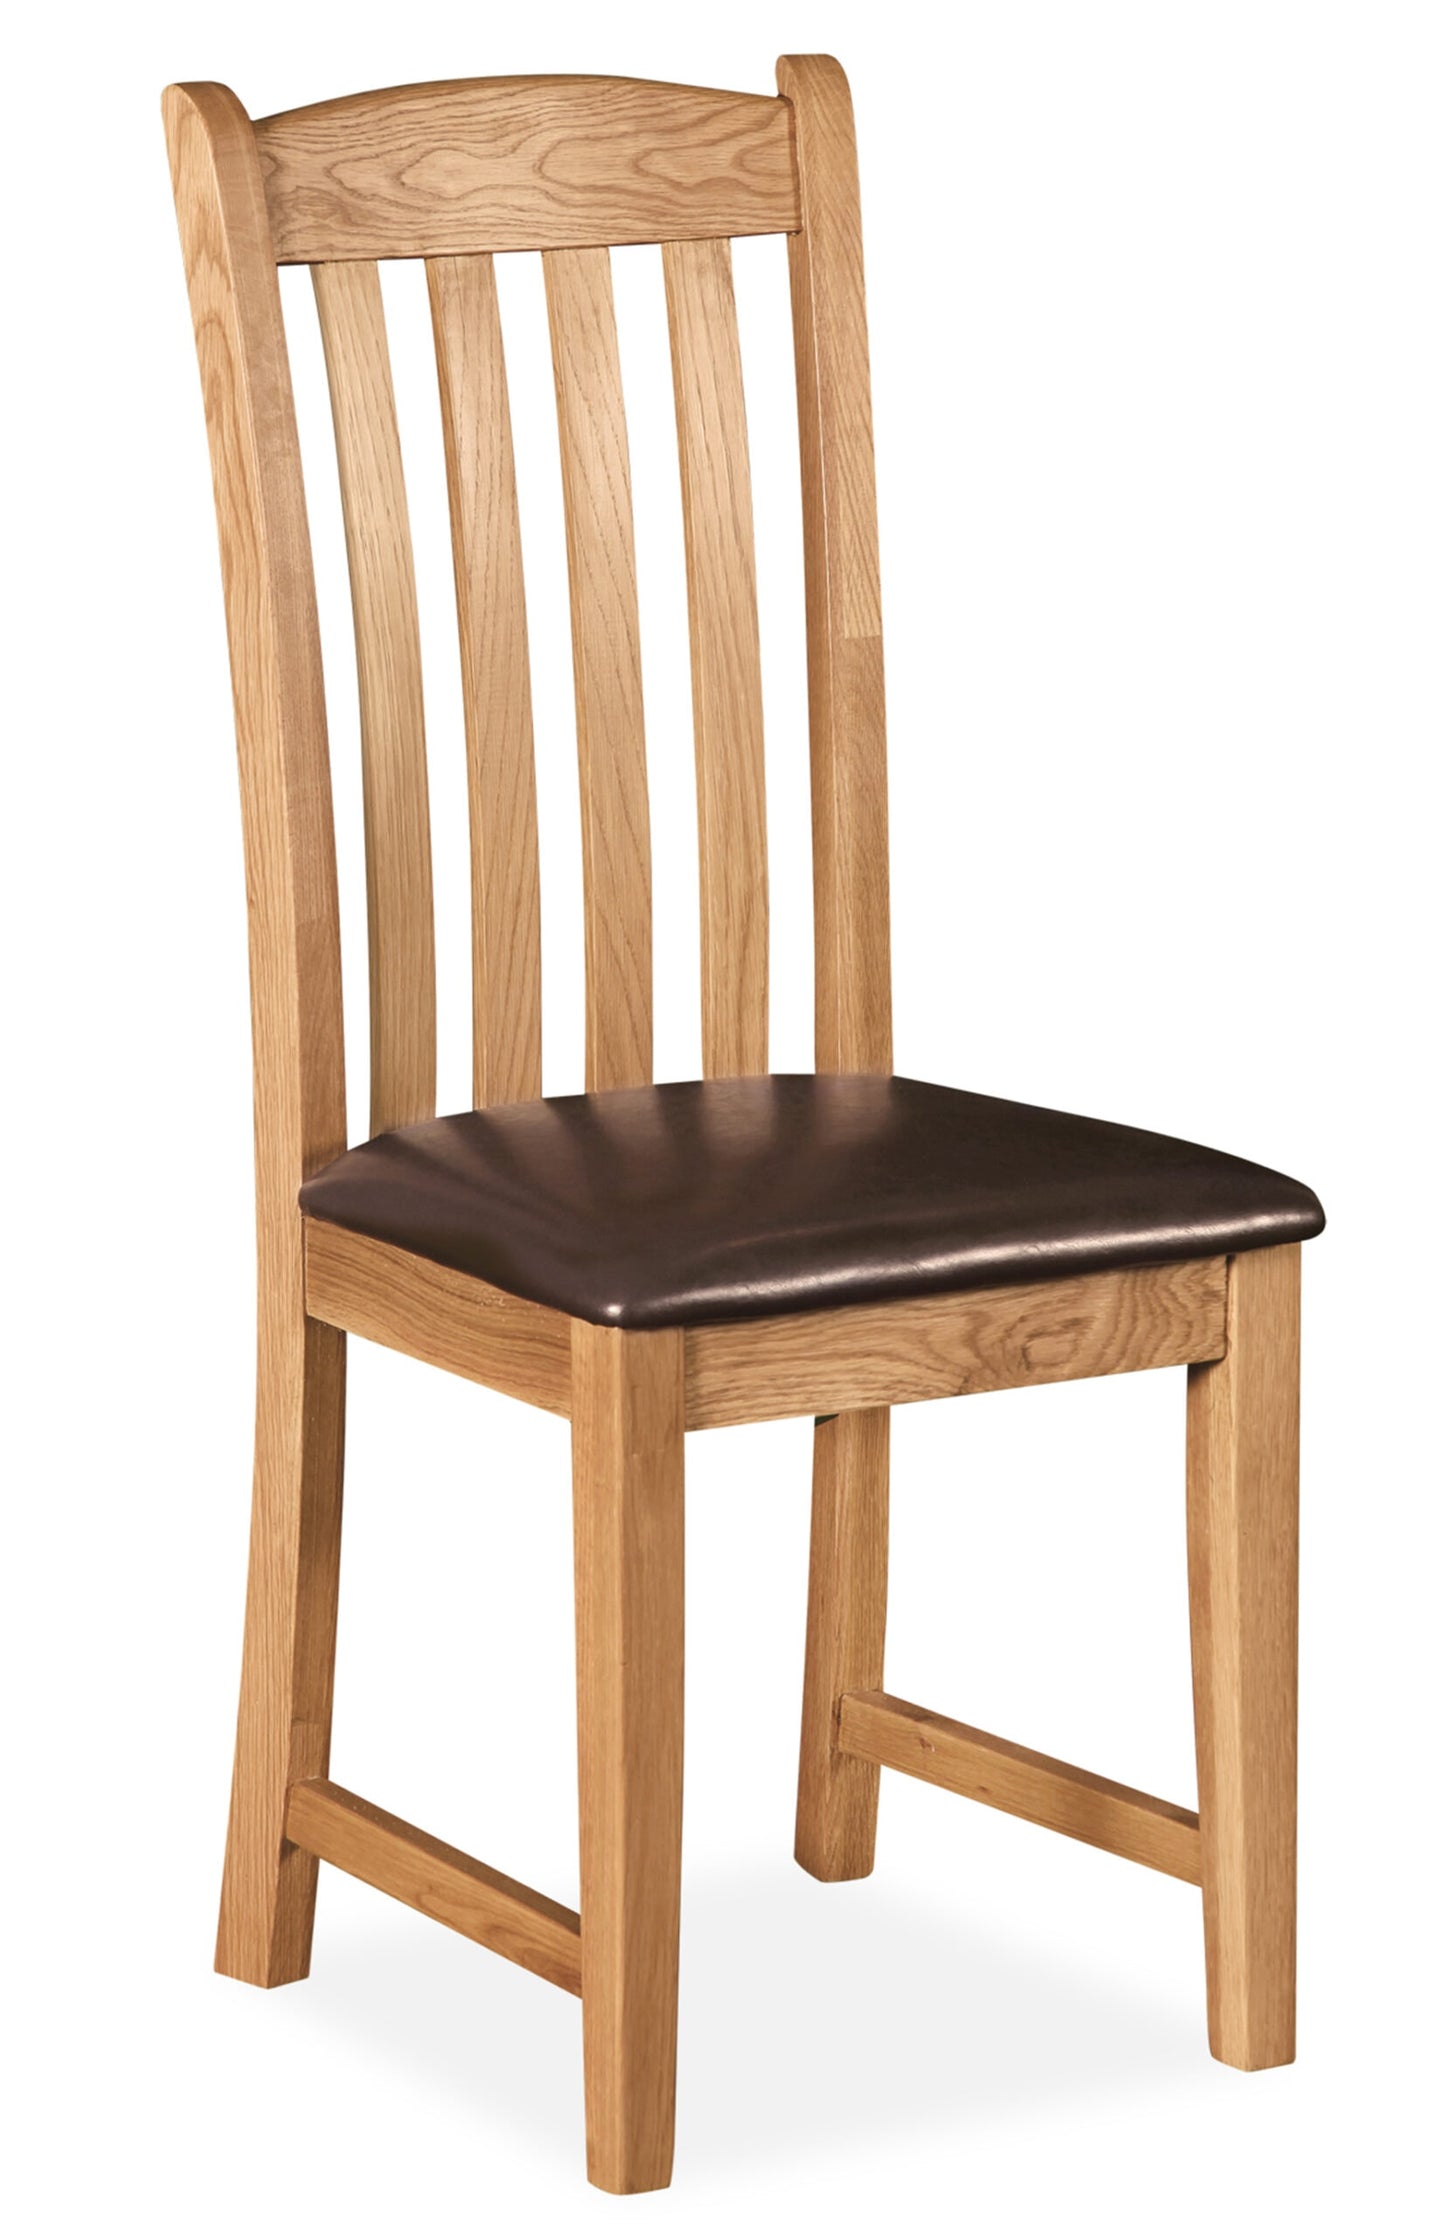 Sussex Oak Dining Chair with PU Seat